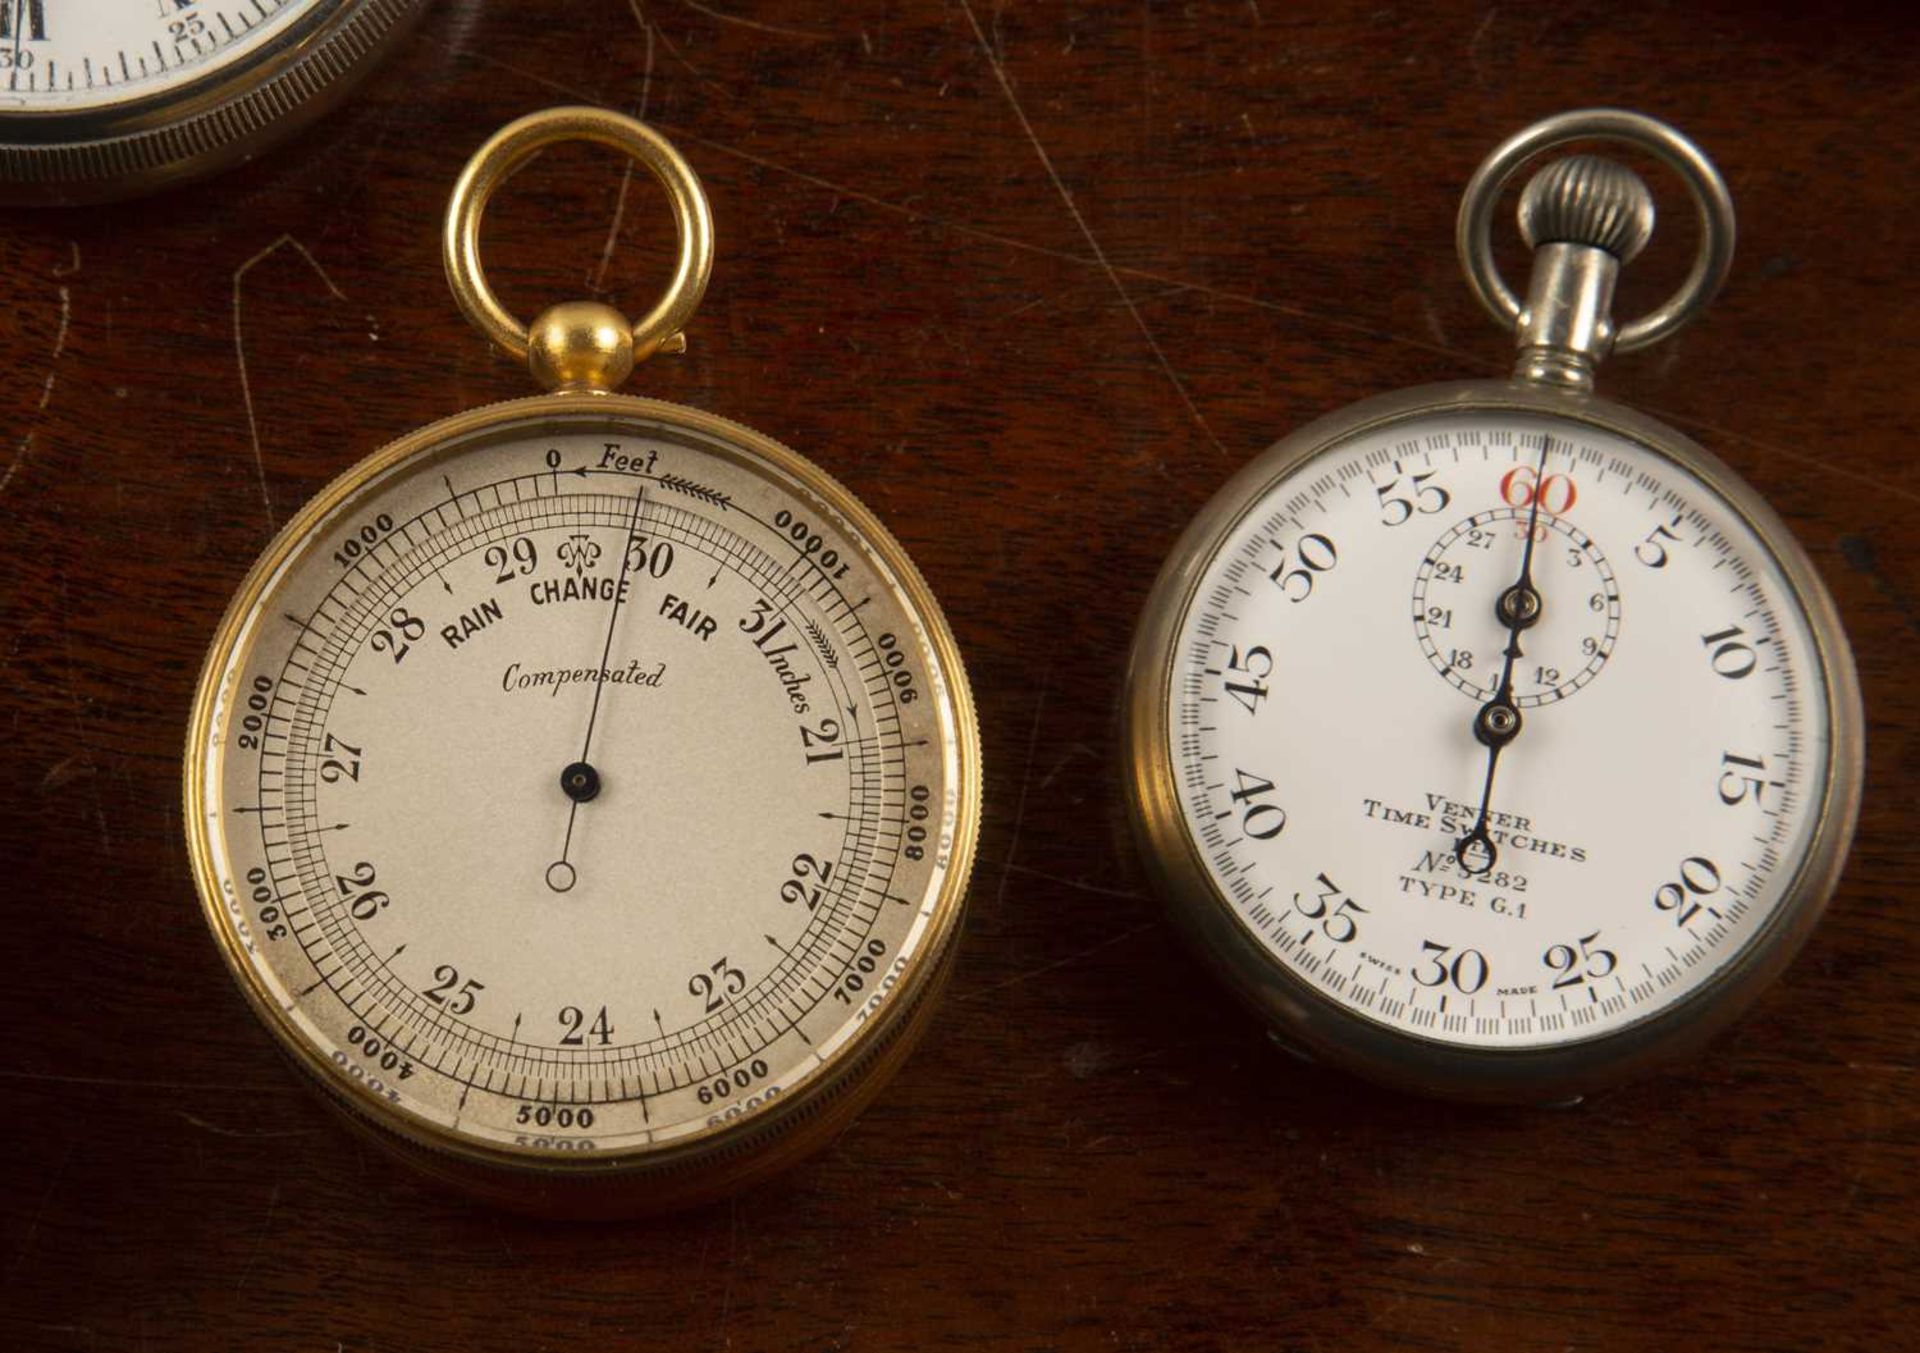 Leather-bound compensated pocket barometer unmarked, 5cm across, together with a cased stopwatch - Image 4 of 4